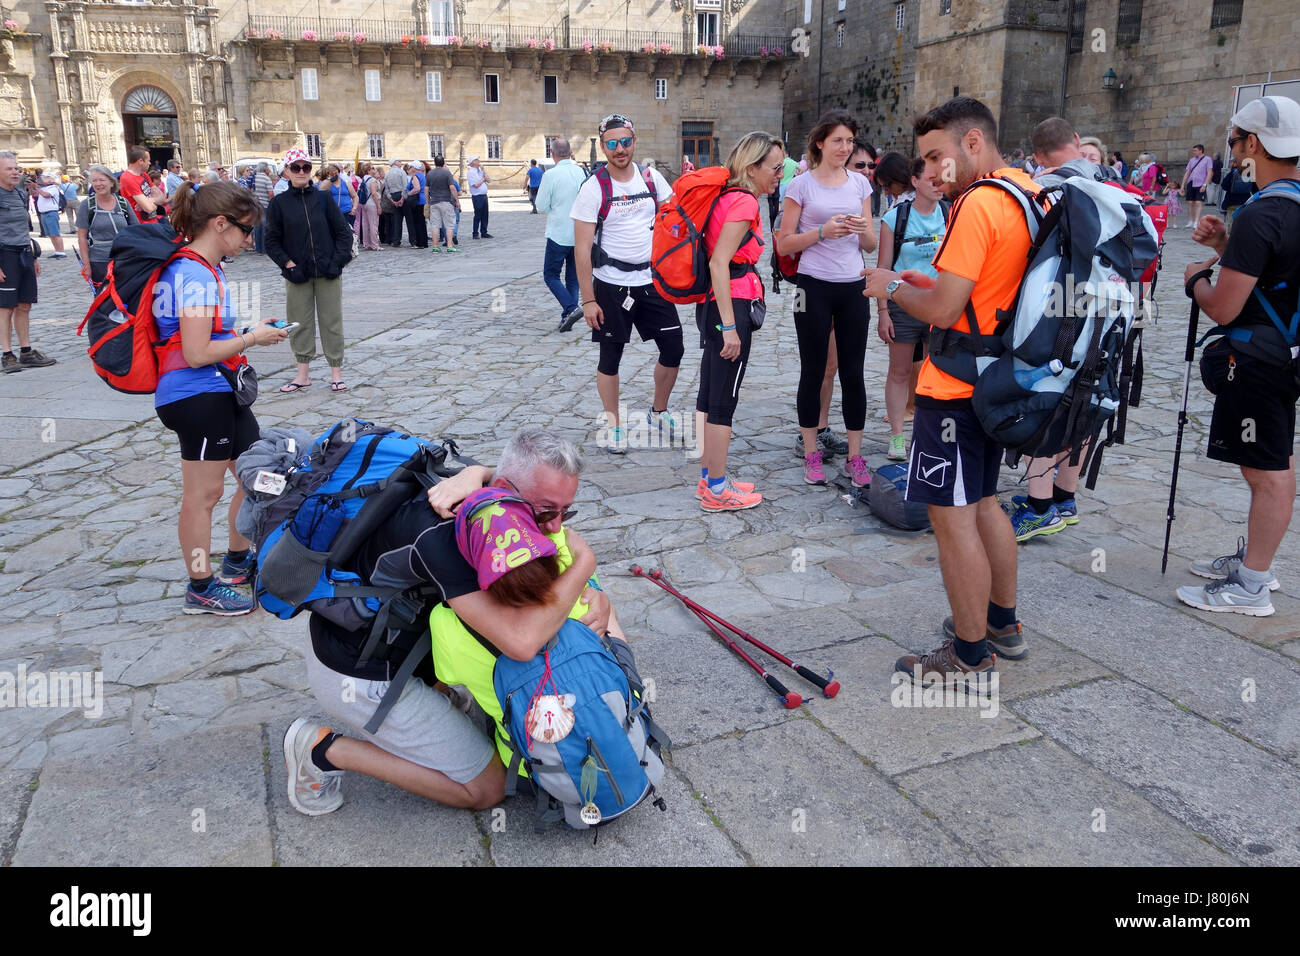 The moment of emotion as Pilgrims arrive in the Cathedral Square of Santiago de Compostela in northern Spain after walking the  Camino de Santiago Stock Photo